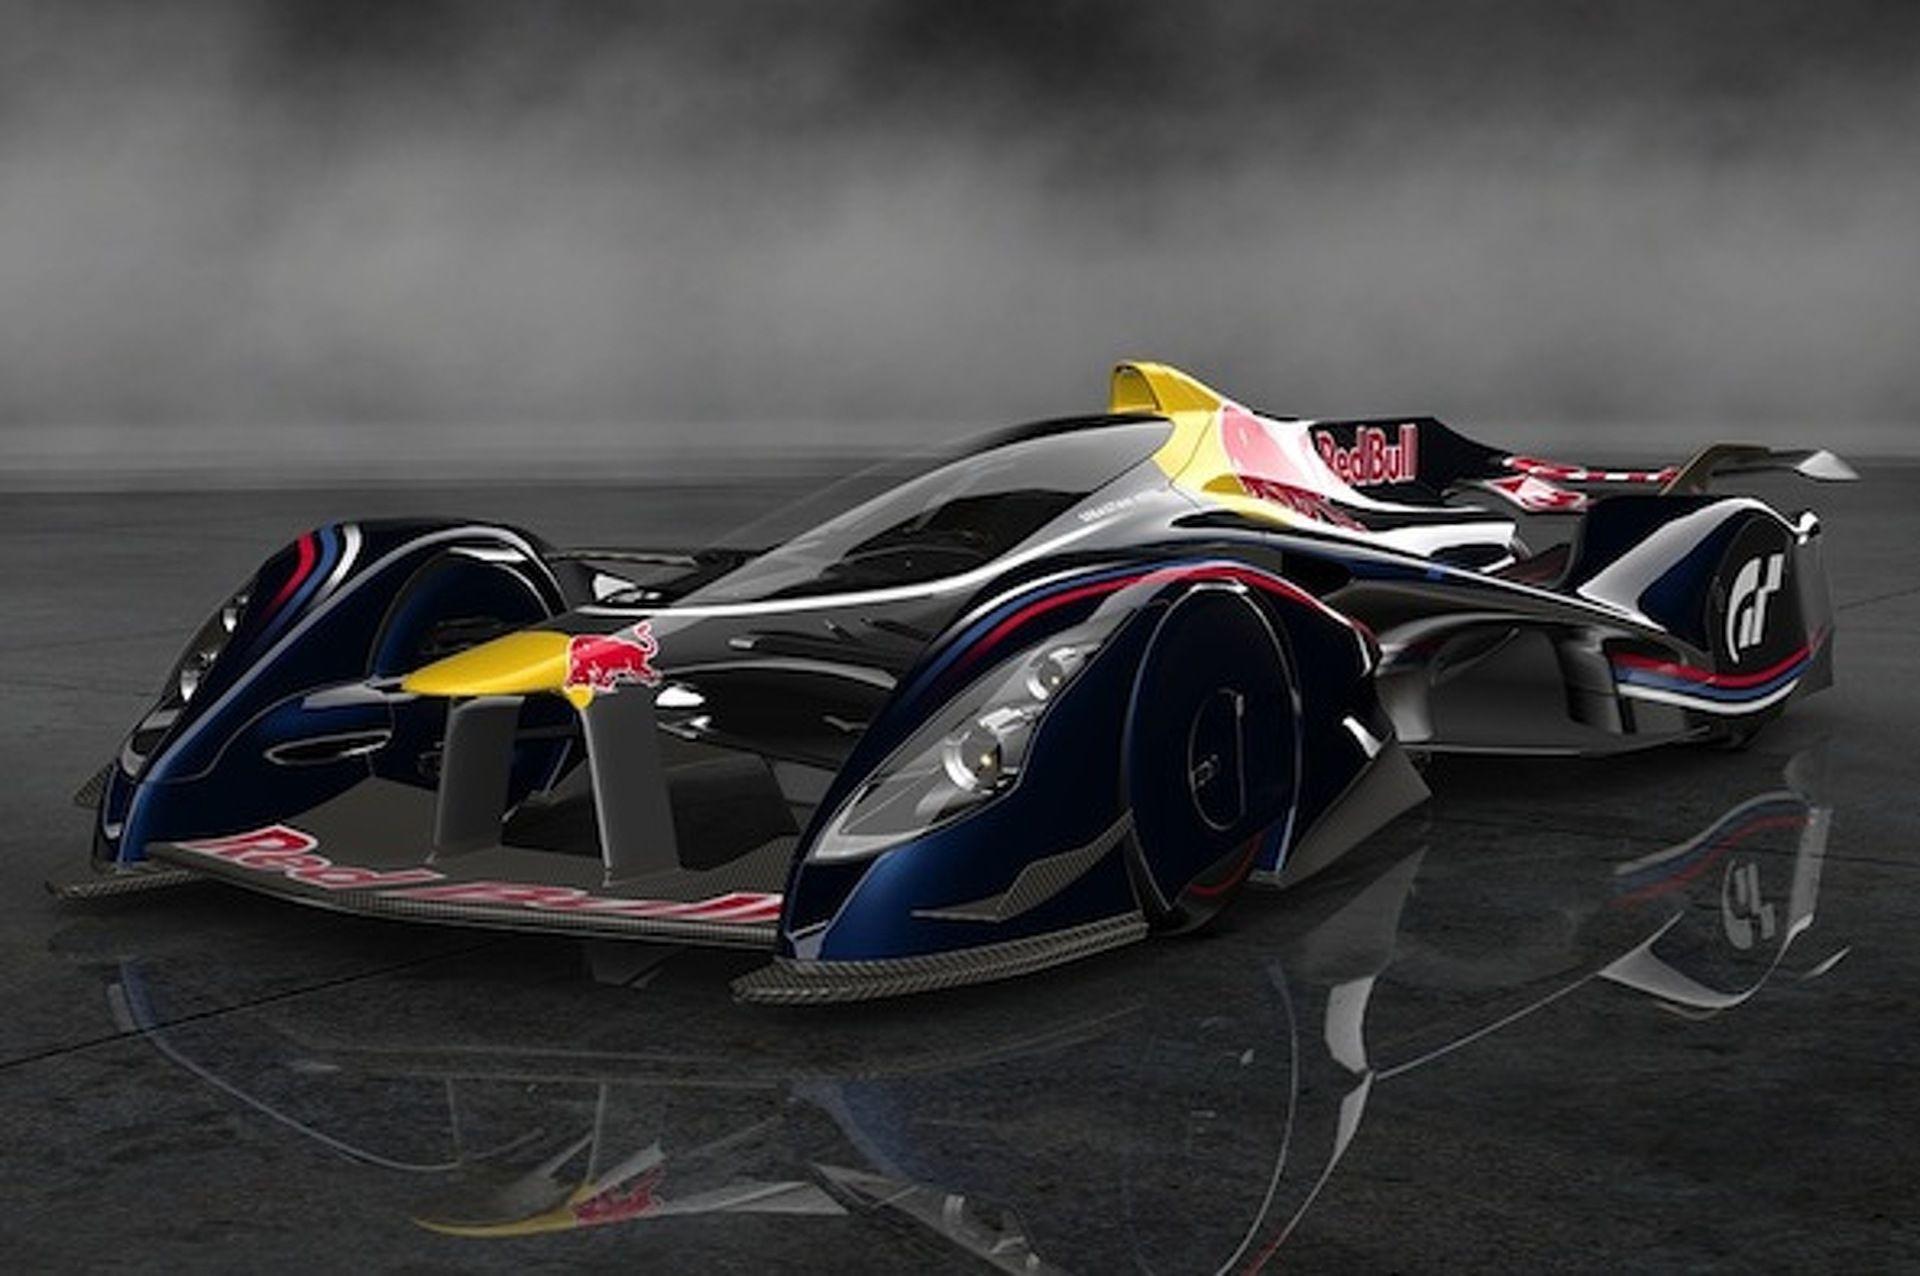 Cool Red Bull Logo - GT6 Red Bull X2014 Concept is Scary Fast, Scary Cool. Motor1.com Photo